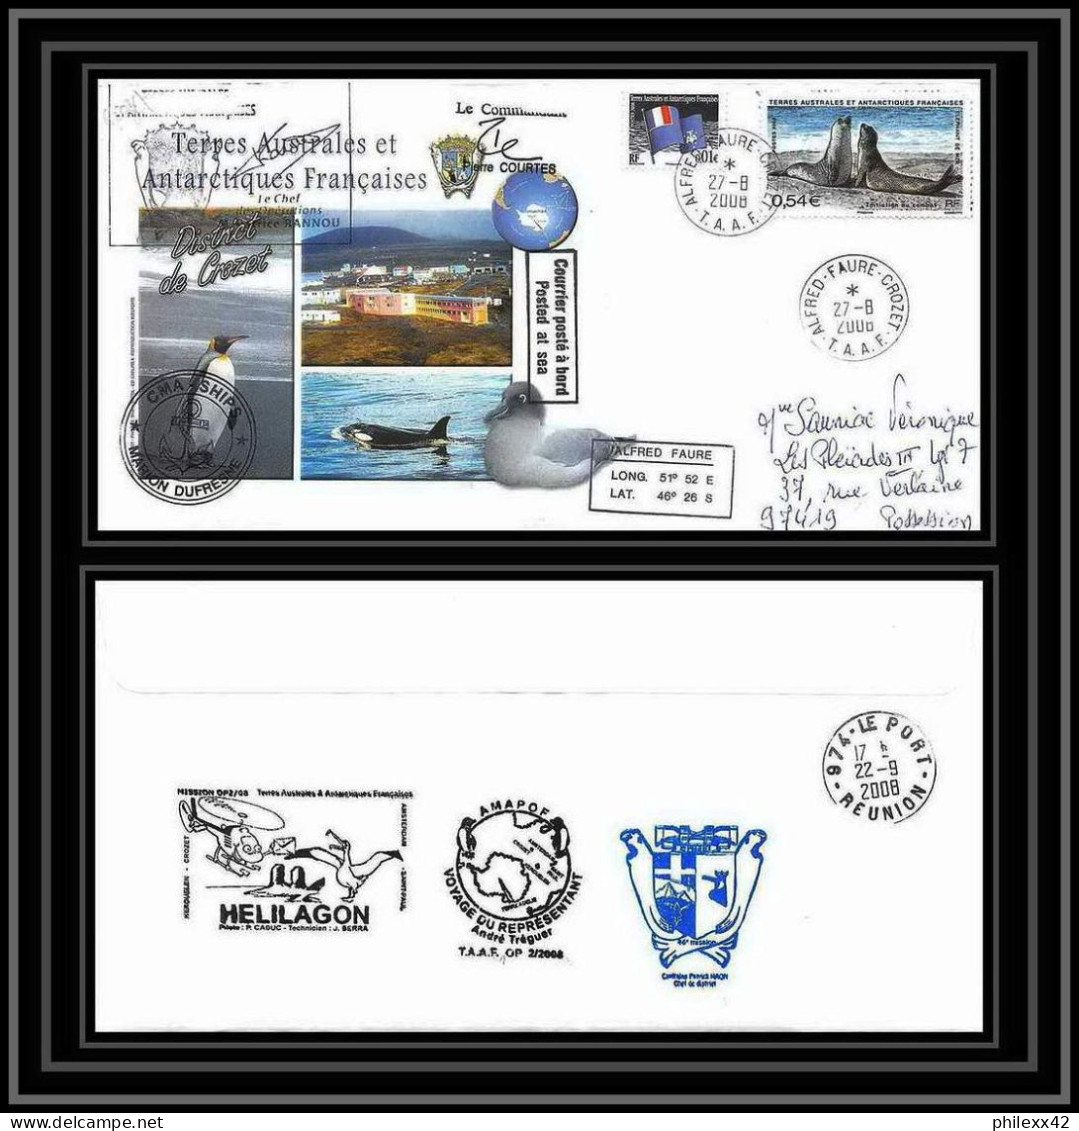 2824 Sea Elephant Terres Australes TAAF Helilagon Lettre Cover Dufresne Signé Signed Op 2008/2 CROZET N°512 27/8/2008 - Elicotteri